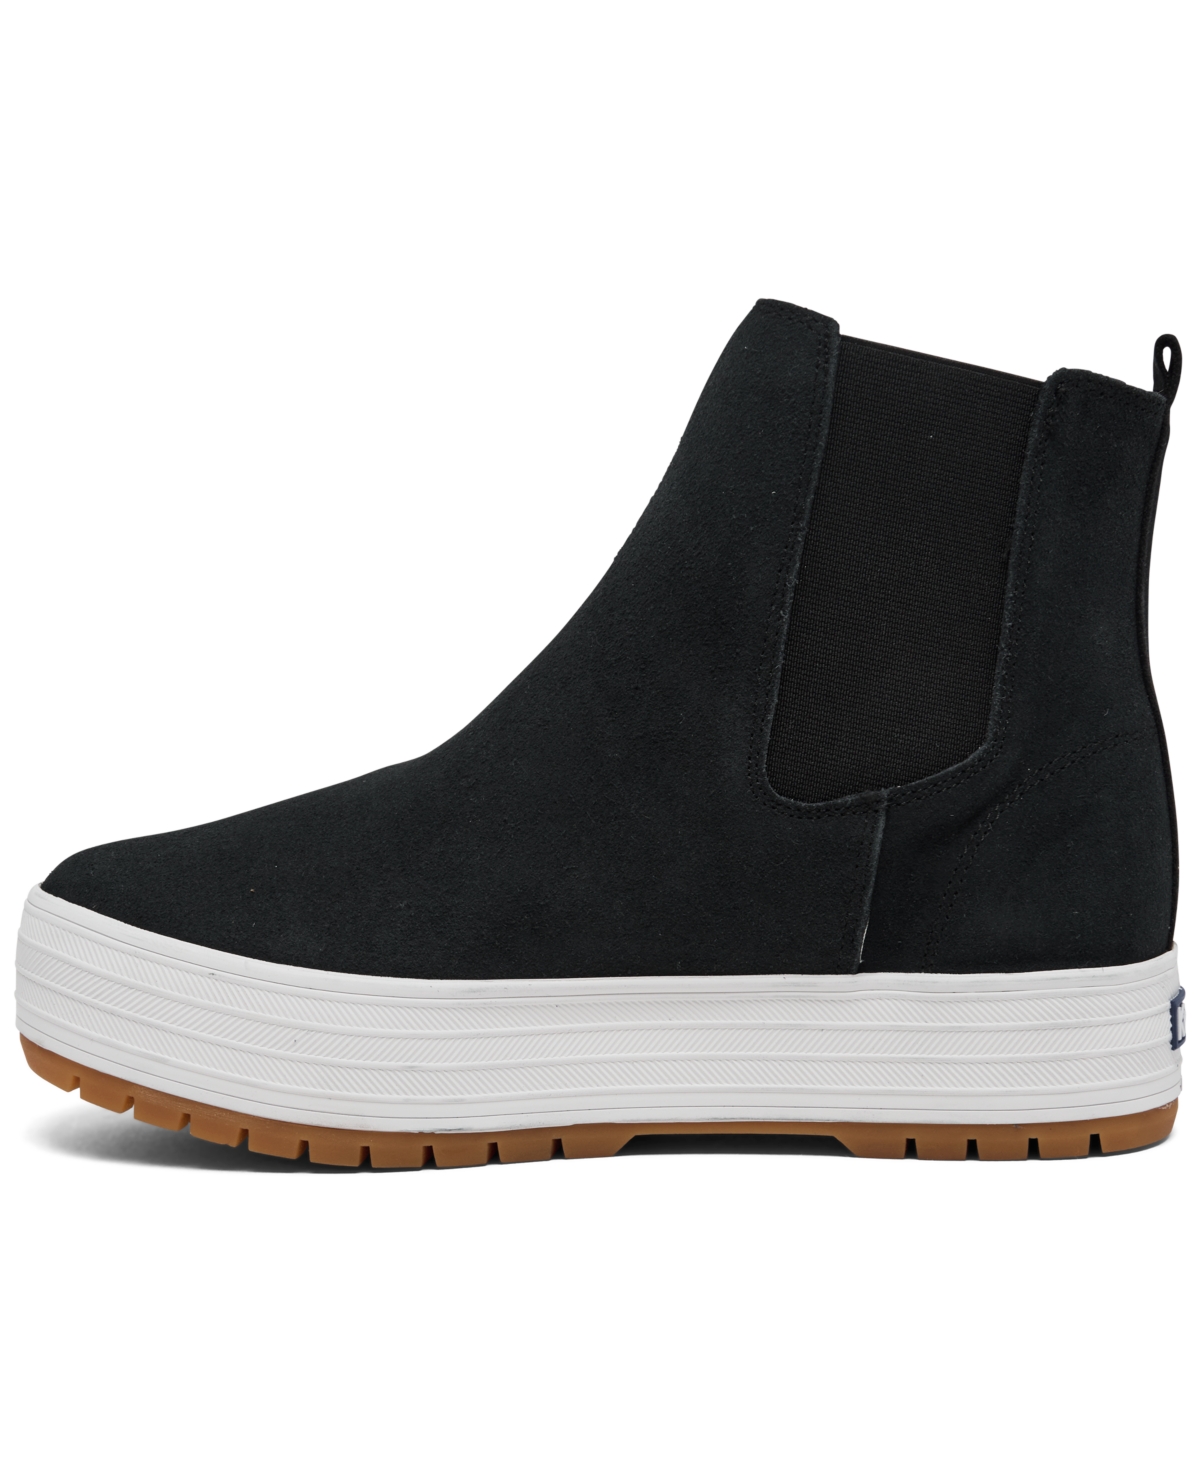 Shop Keds Women's Chelsea Lug Boots From Finish Line In Black